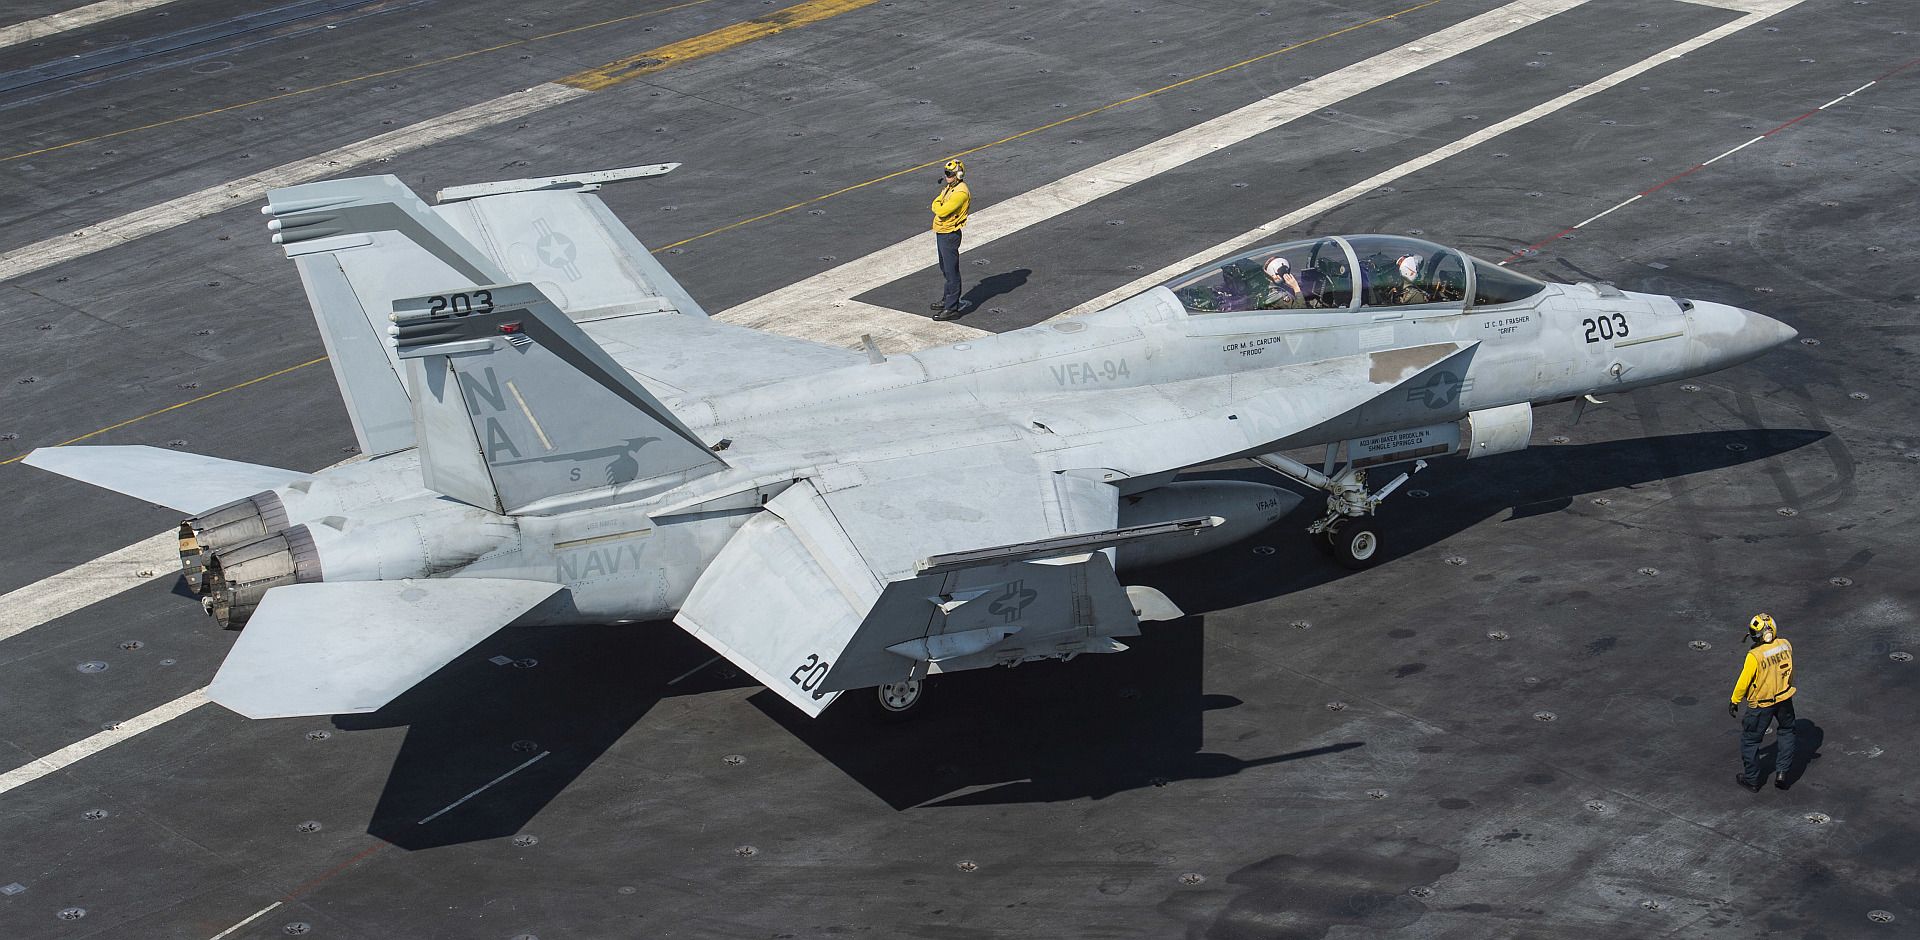 FA 18F Super Hornet From The Mighty Shrikes Of Strike Fighter Squadron 94 Taxis Across The Flight Deck Of The Aircraft Carrier USS Nimitz